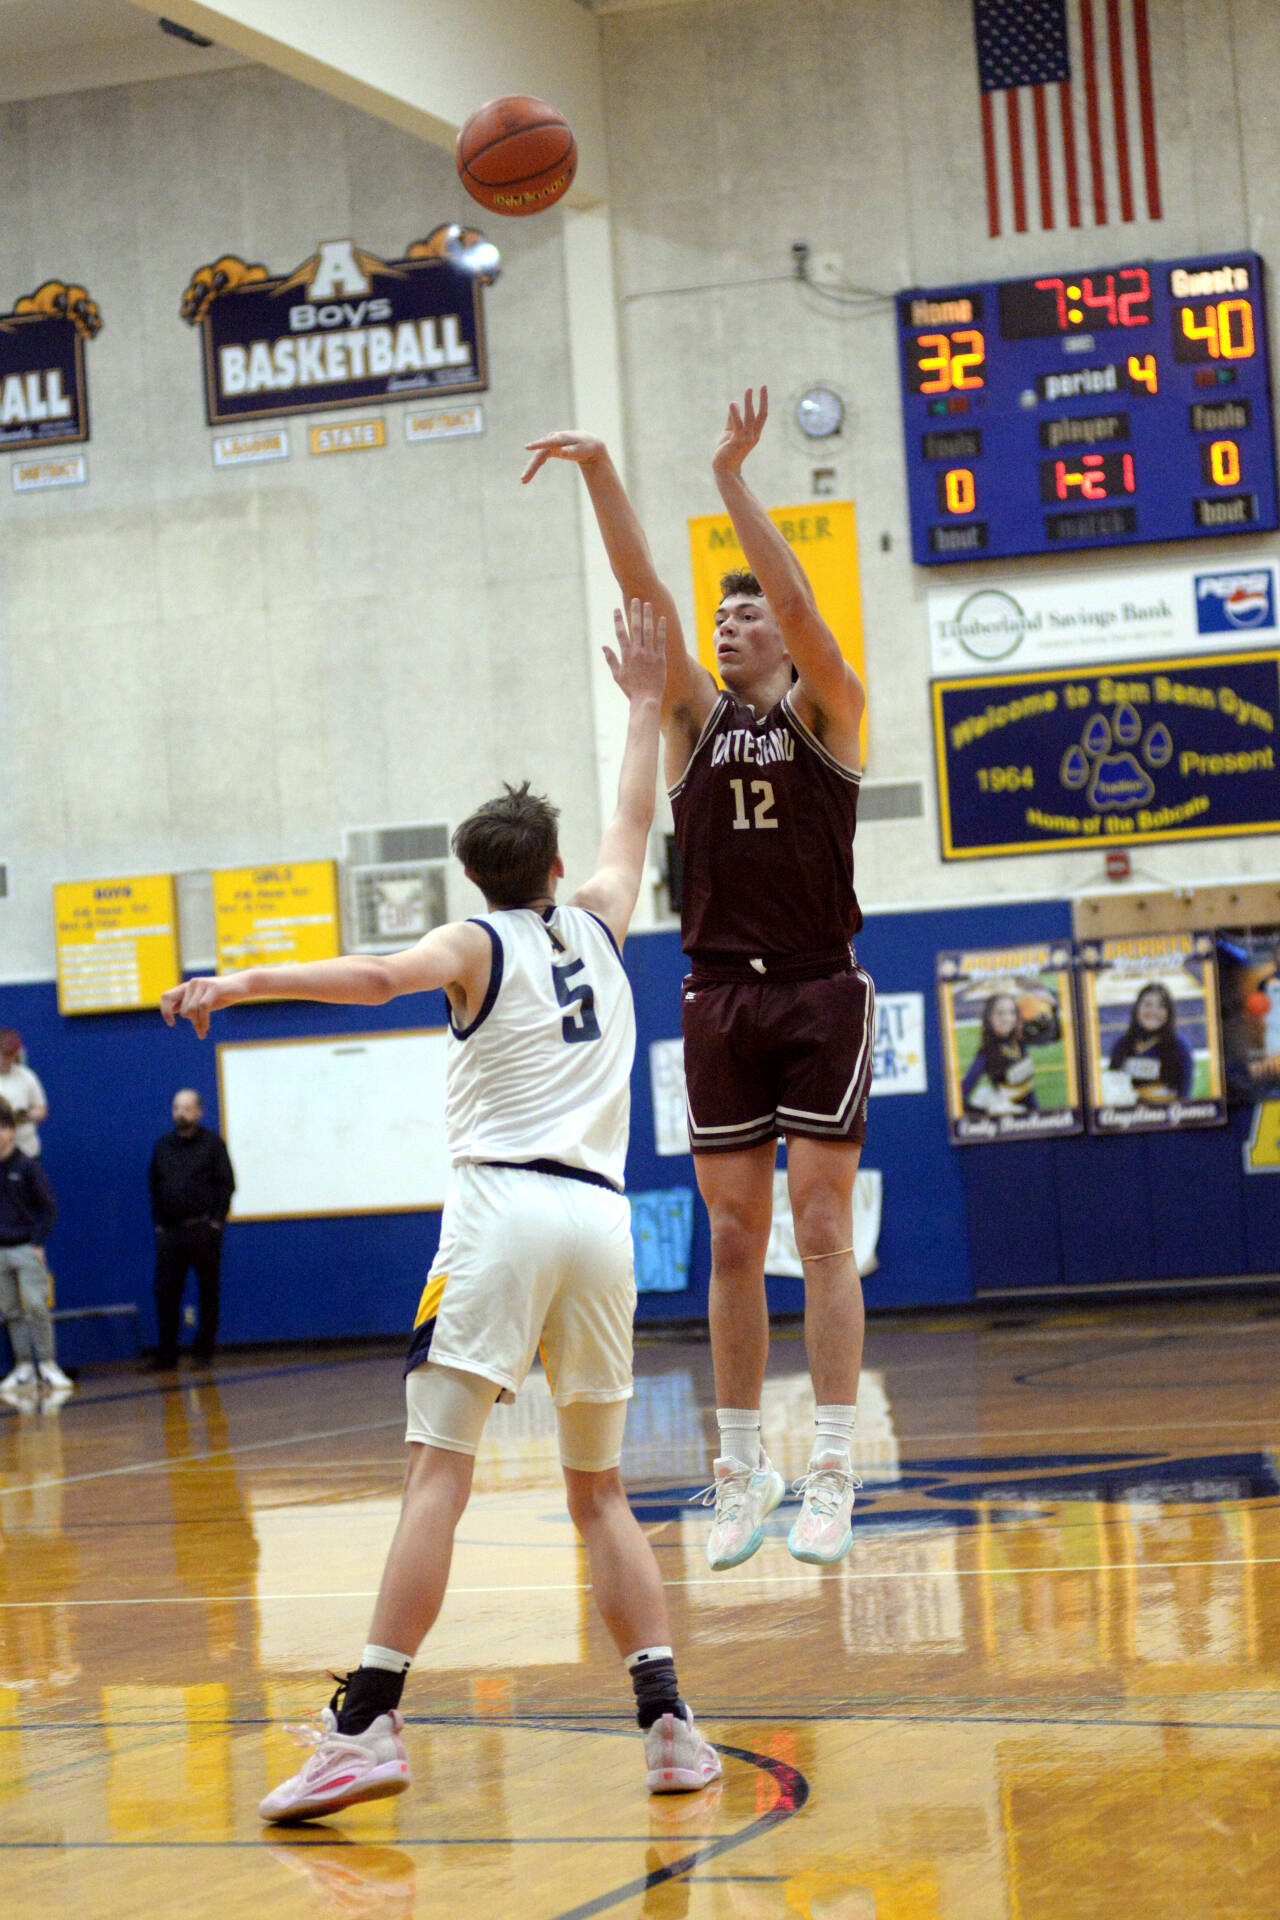 RYAN SPARKS | THE DAILY WORLD Montesano senior Gabe Bodwell (12) shoots while defended by Aberdeen’s Baylor Ainsworth during Monte’s 52-38 victory on Saturday at Aberdeen High School.